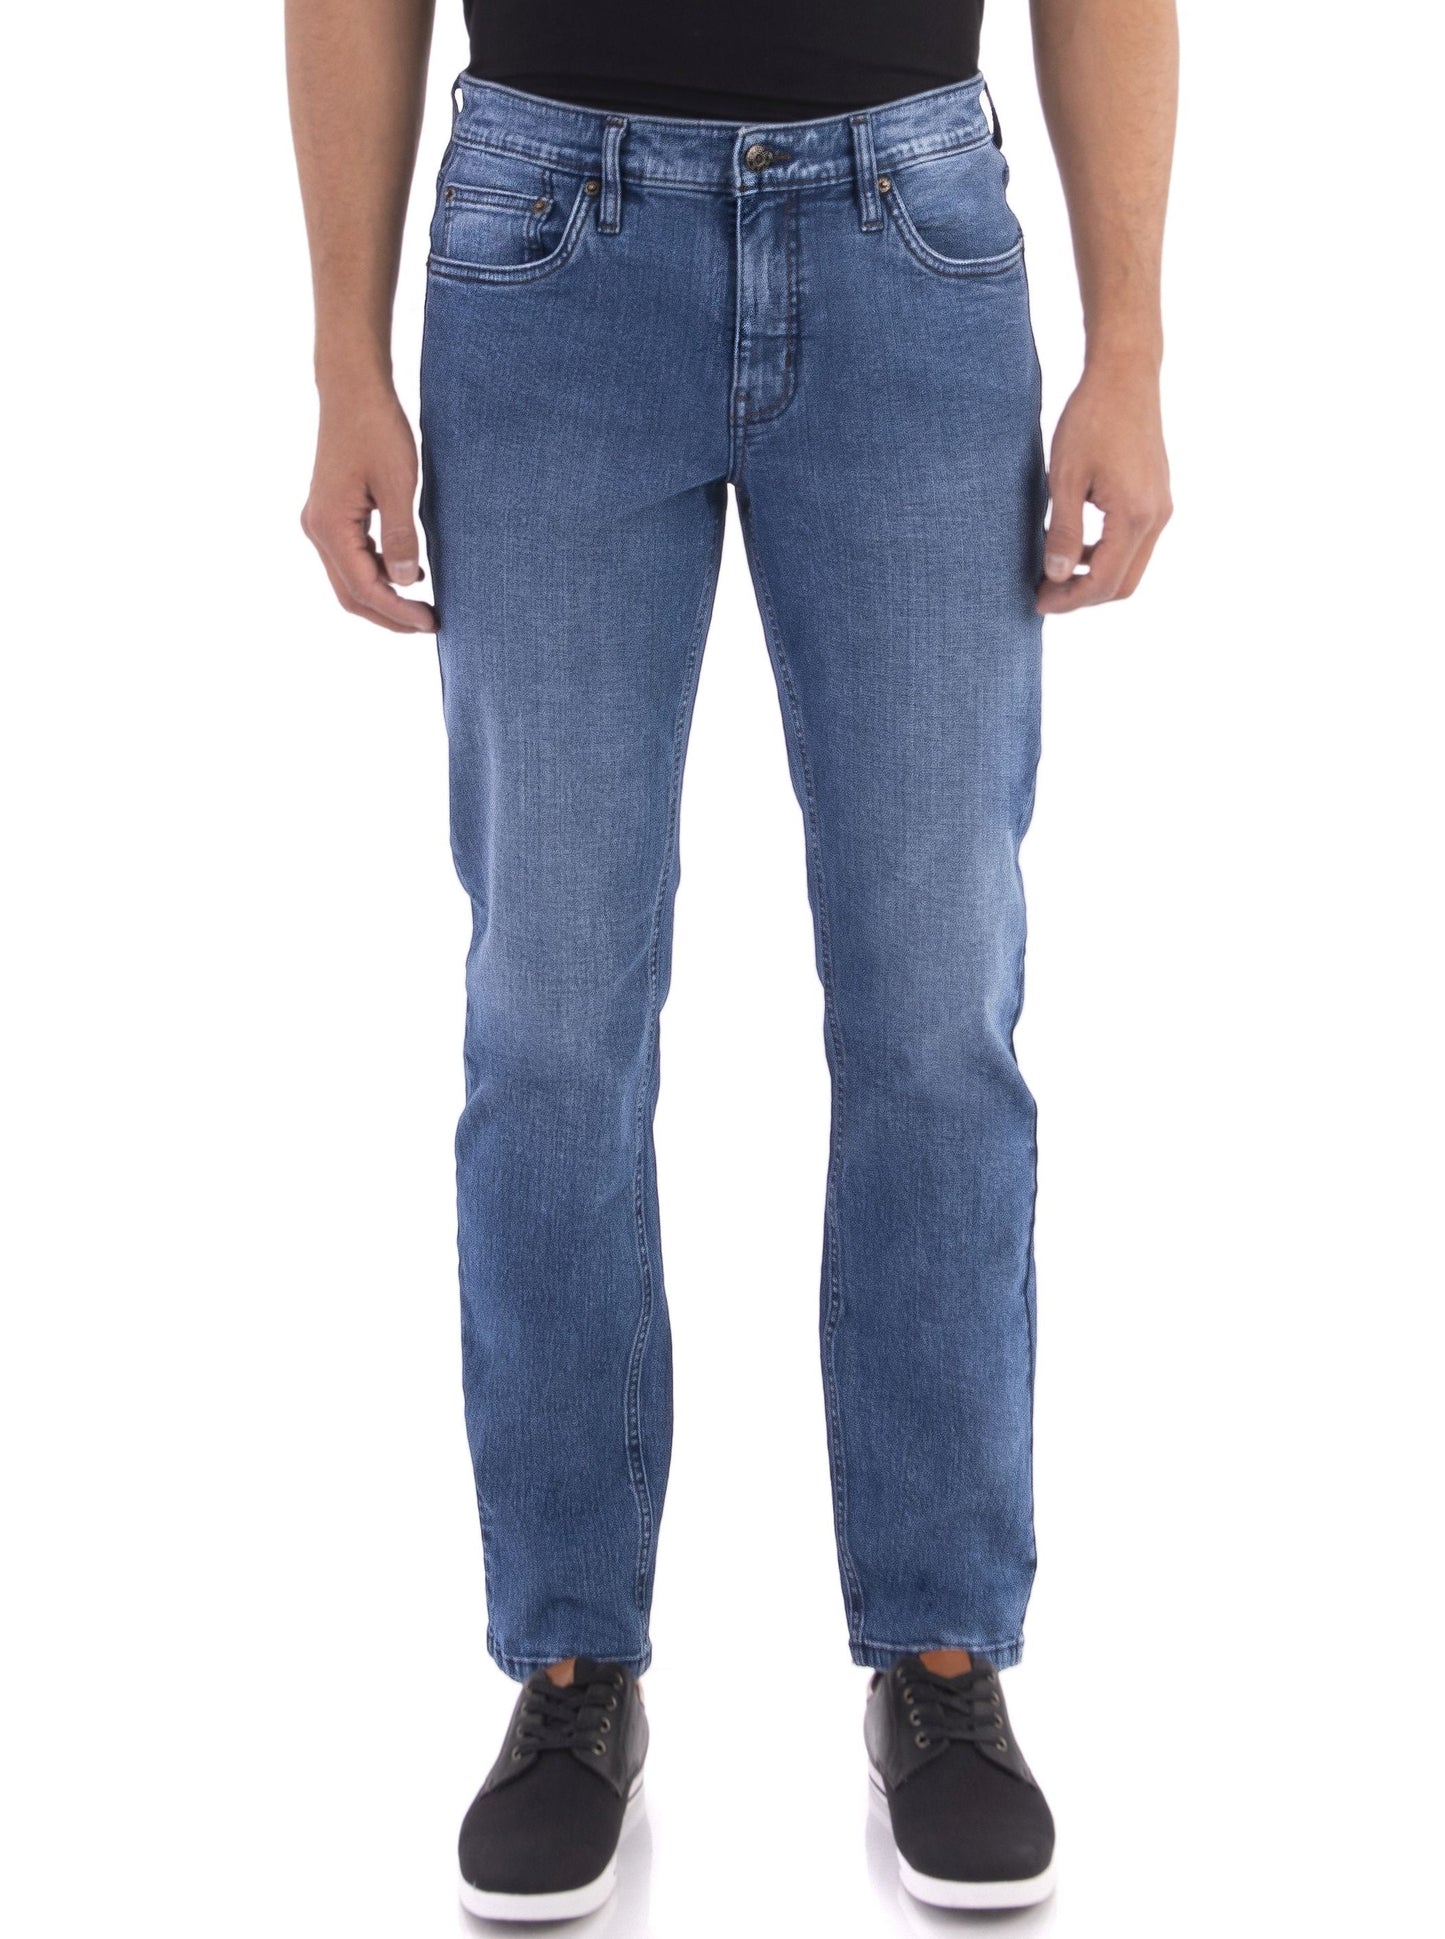 
                  
                    classic blue washed jeans with blue stitch, slim fit
                  
                